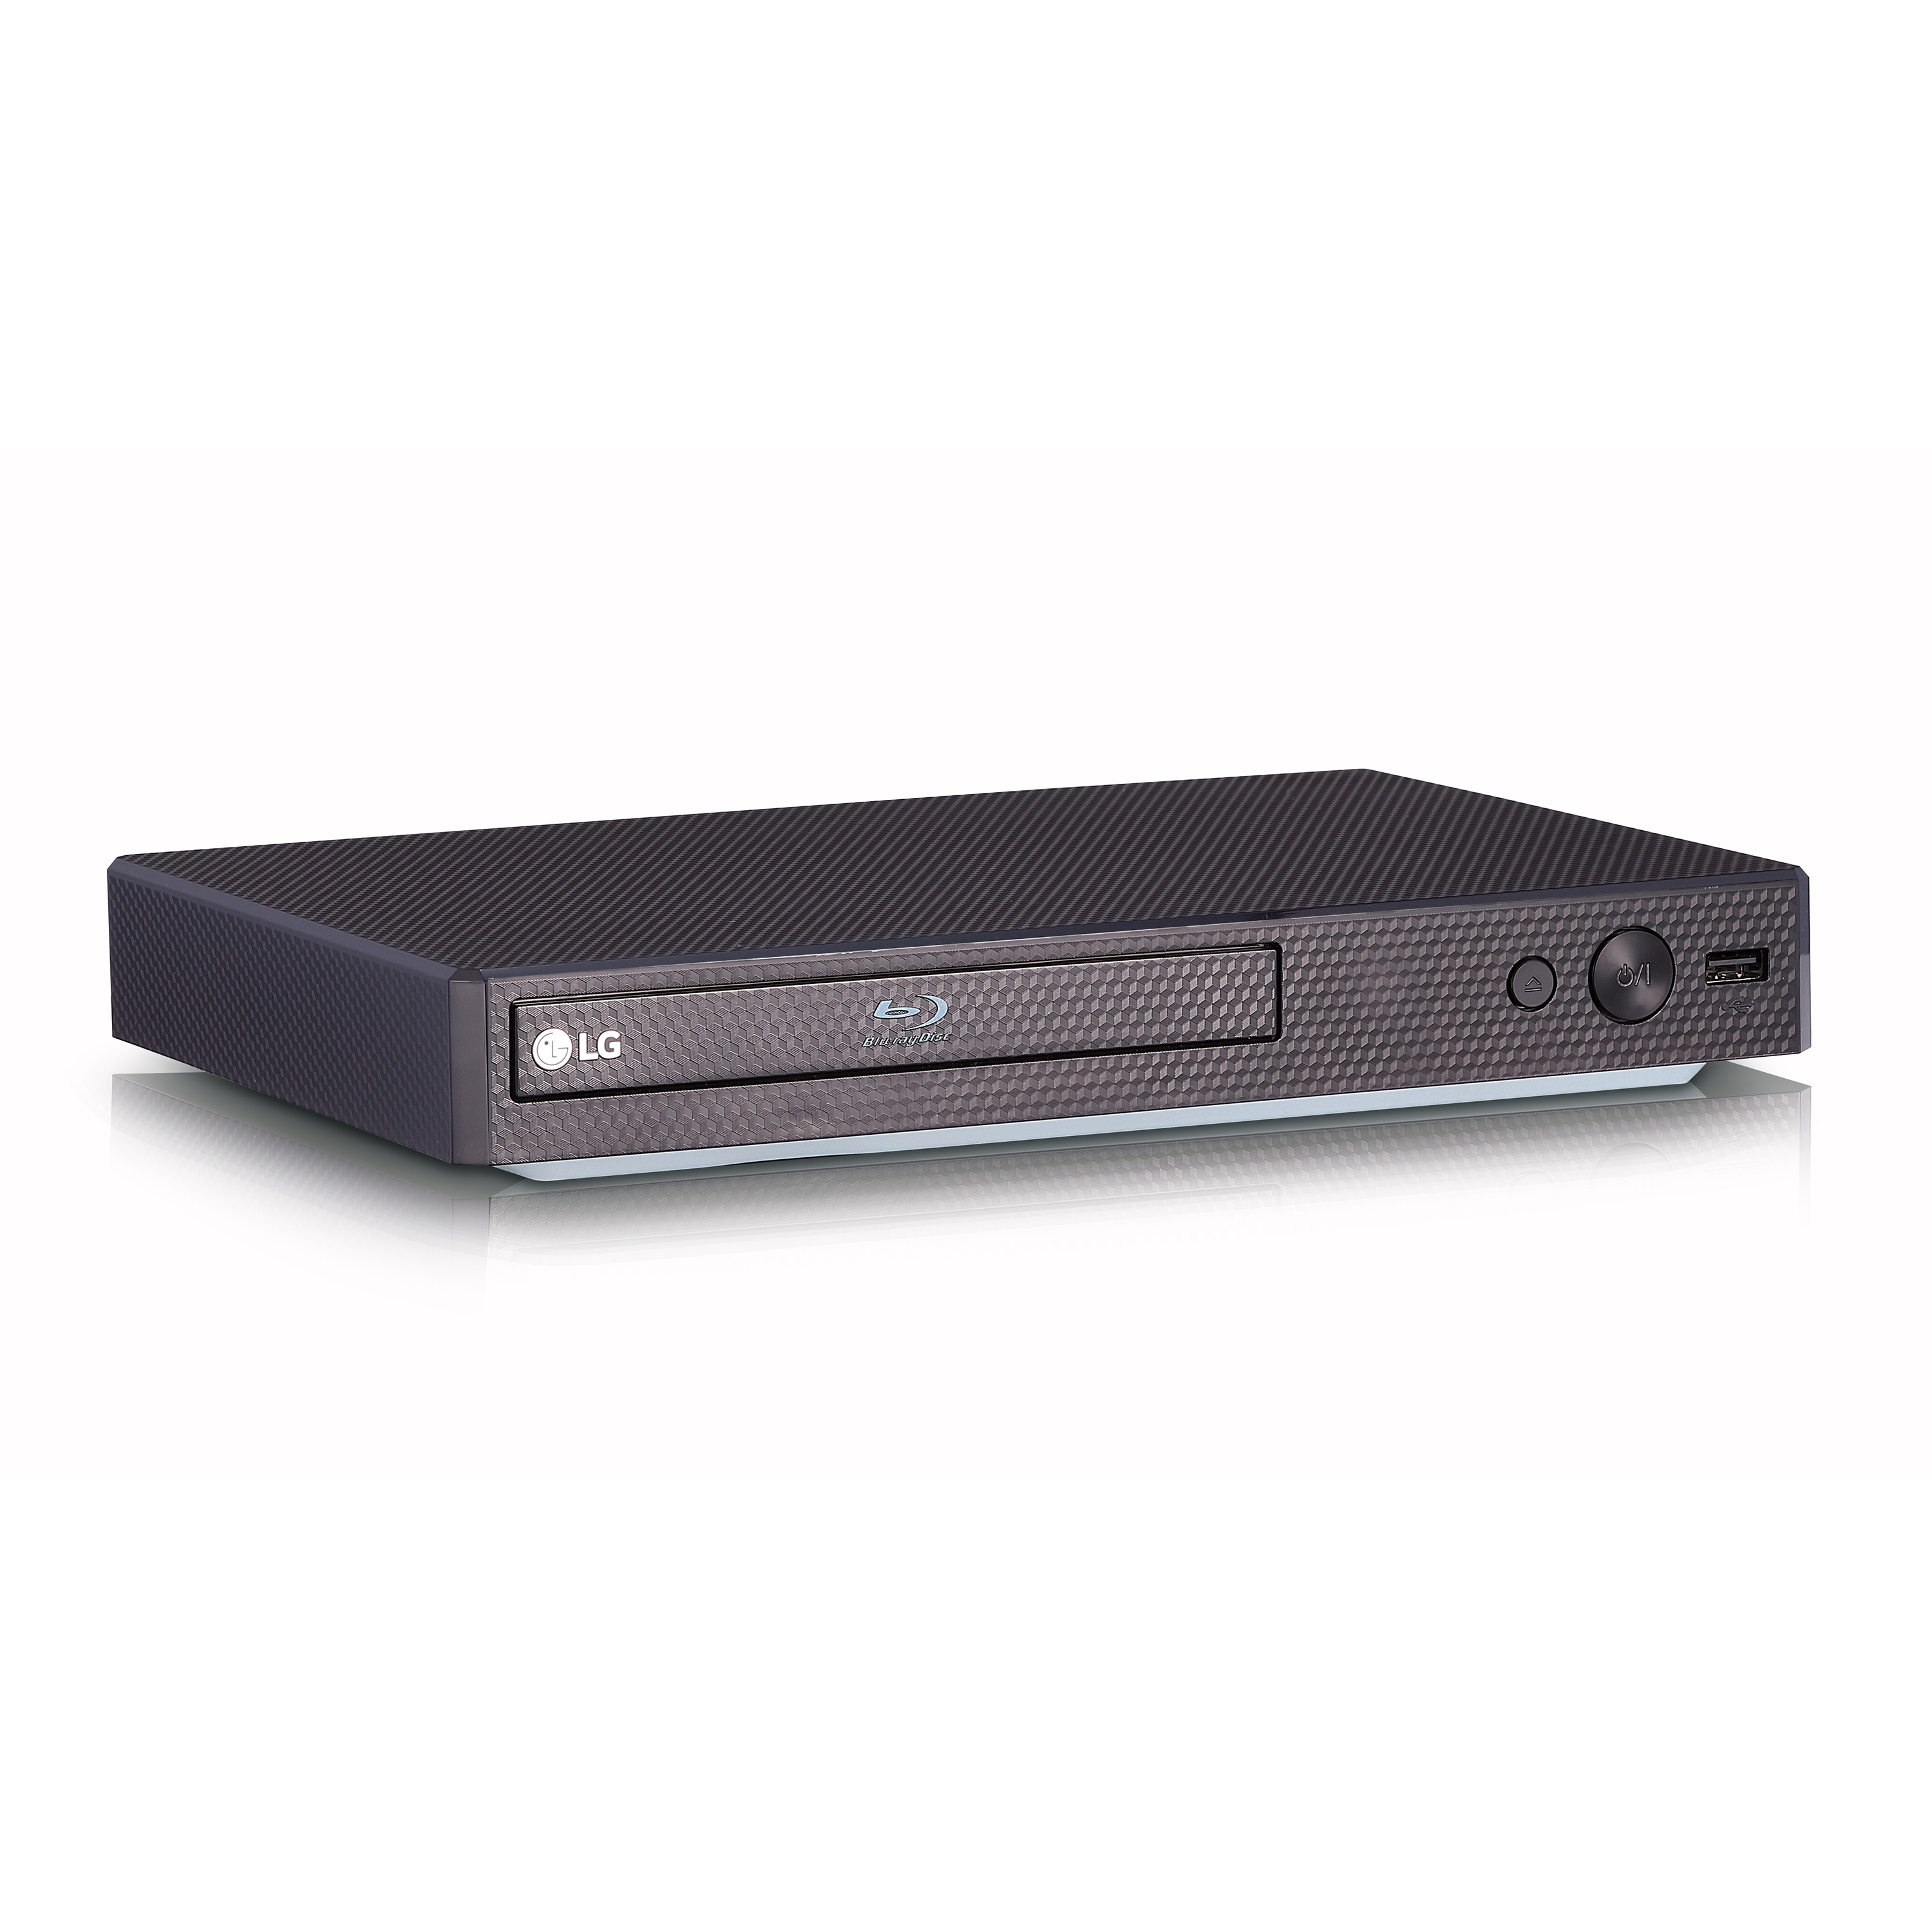 LG Blu-ray Player with Streaming Services - BPM25 - image 3 of 12